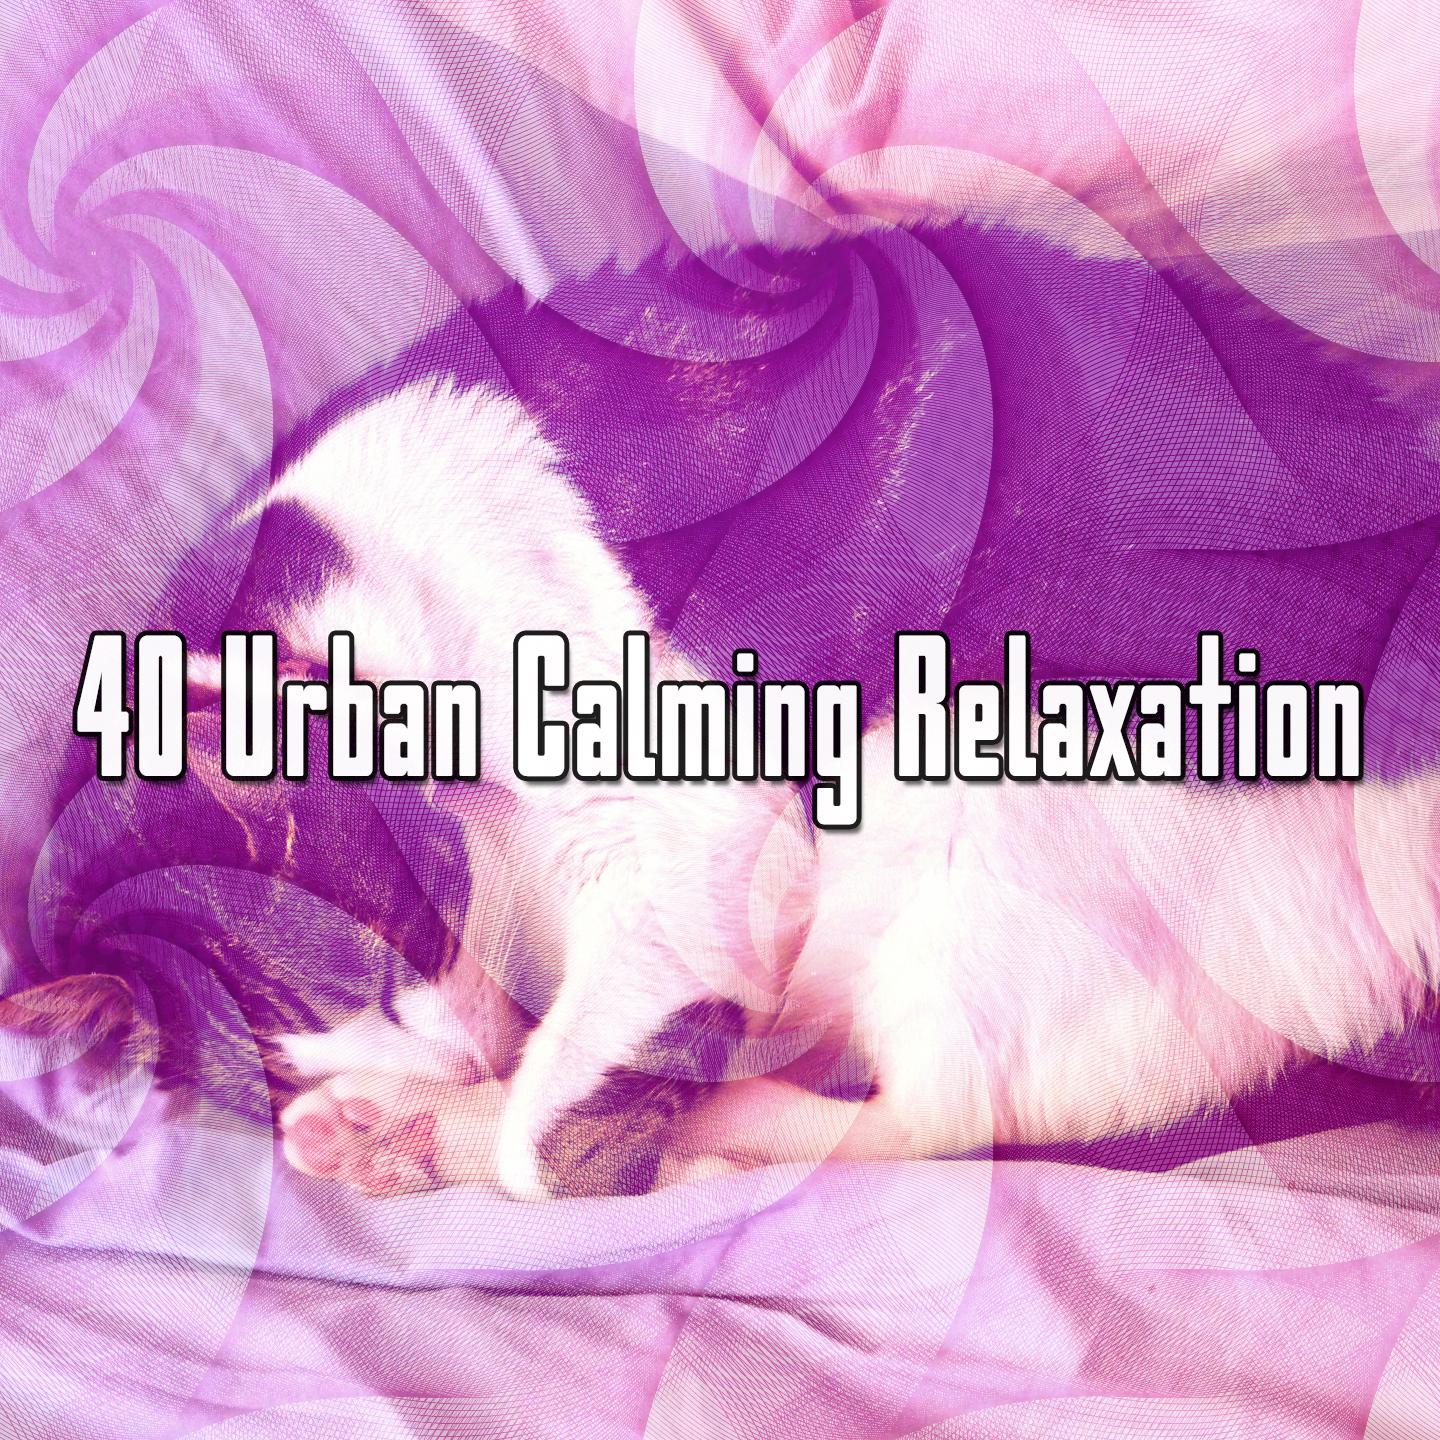 40 Urban Calming Relaxation